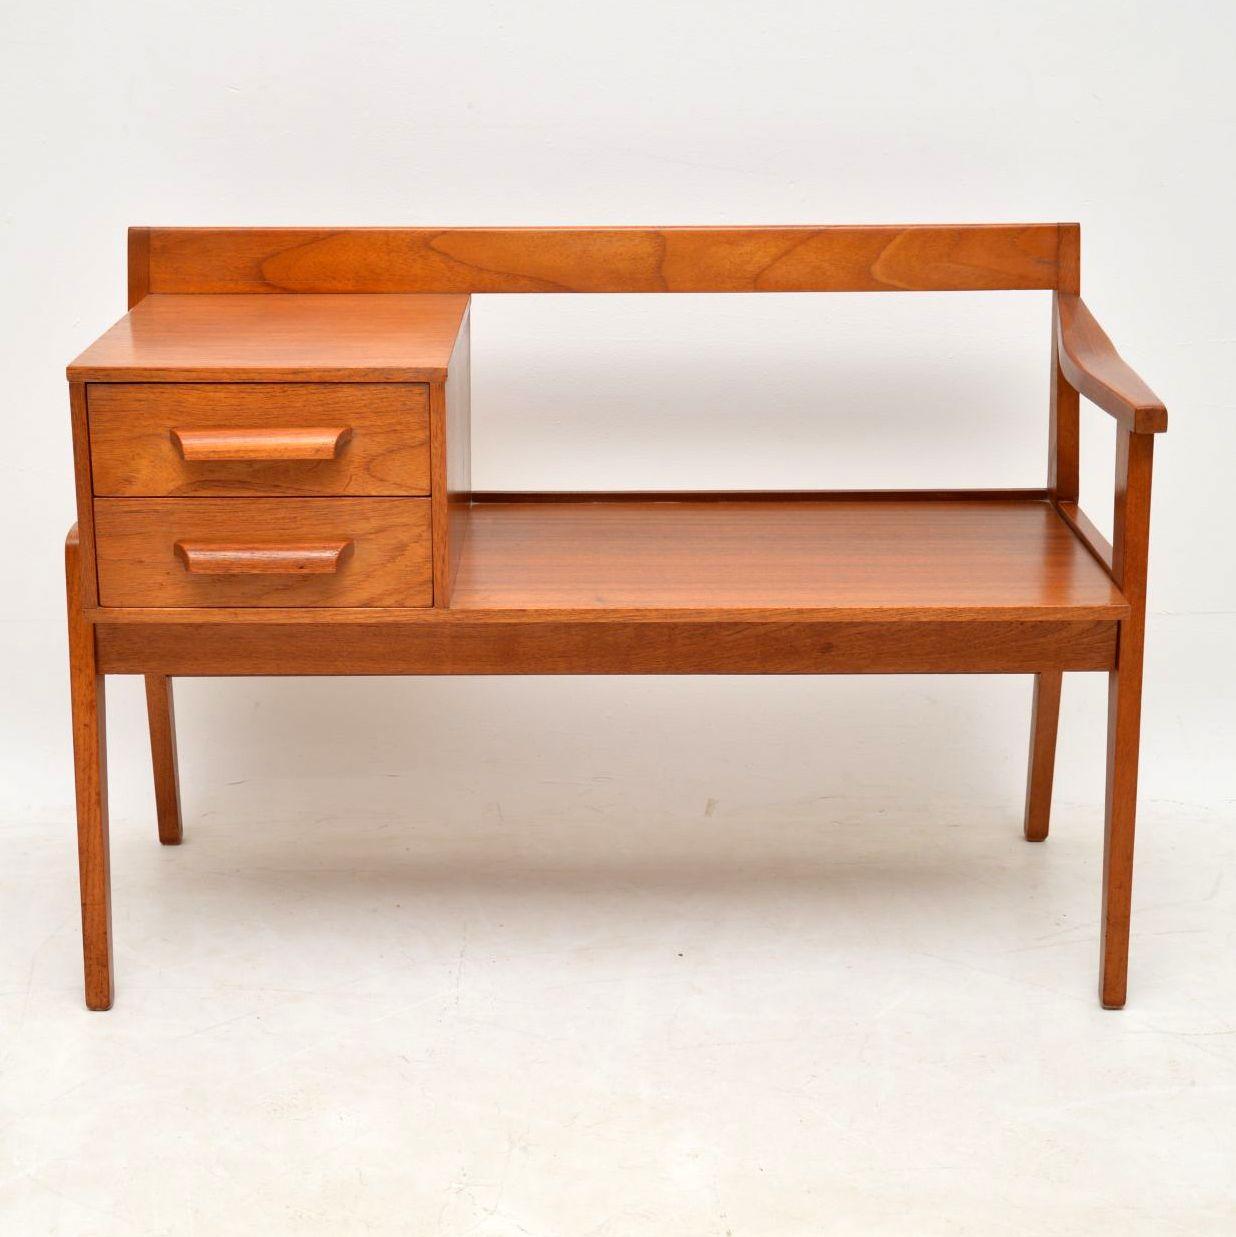 A beautiful and stylish entry bench that is designed for use as a telephone table, this dates from the 1960’s. It’s really well made and is in superb condition for its age, with only some extremely minor wear here and there.

Width – 92 cm , 36